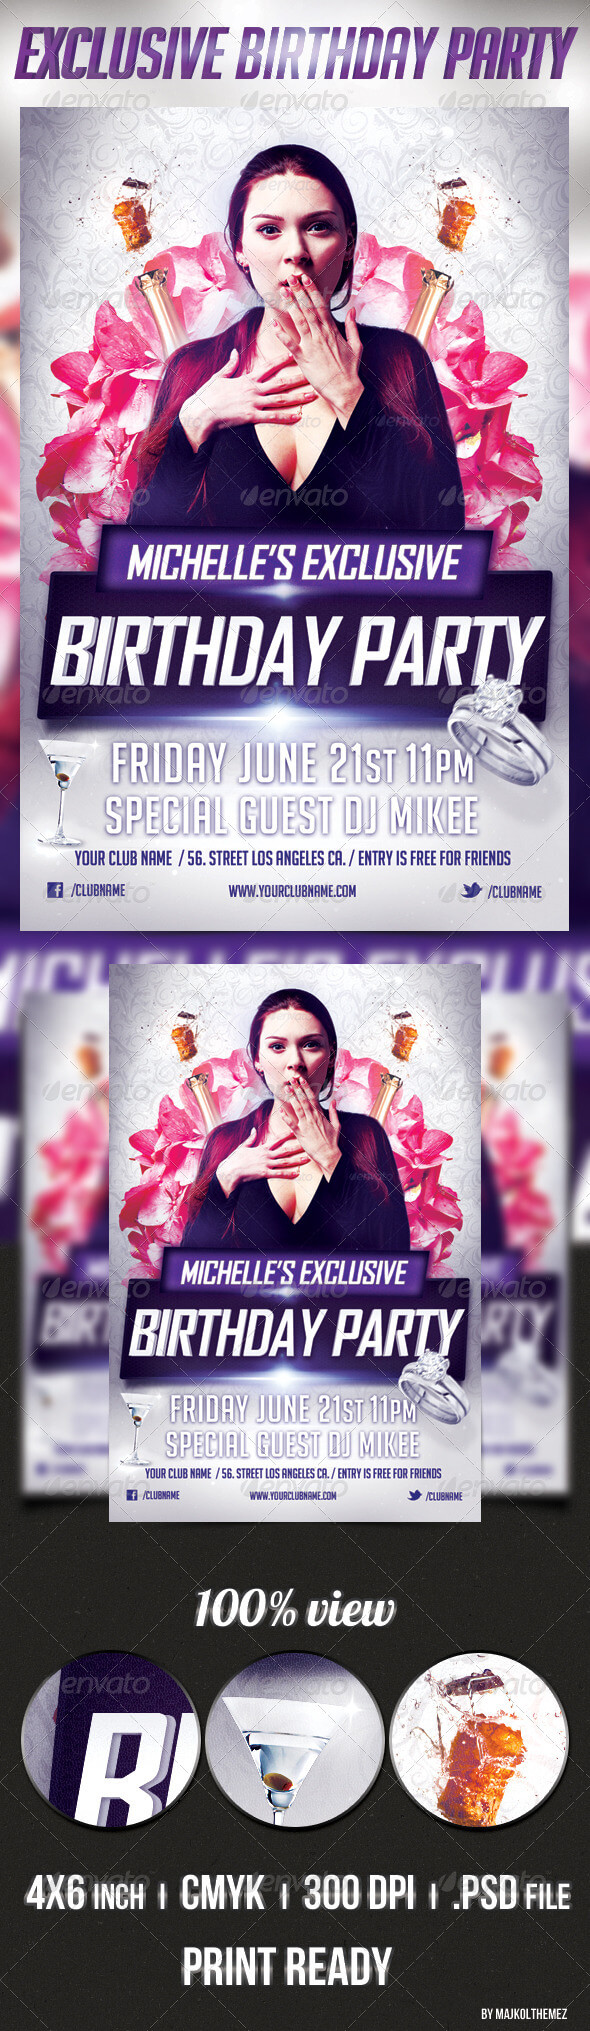 Bday Flyer Graphics, Designs & Templates From Graphicriver For Birthday Party Flyer Templates Free